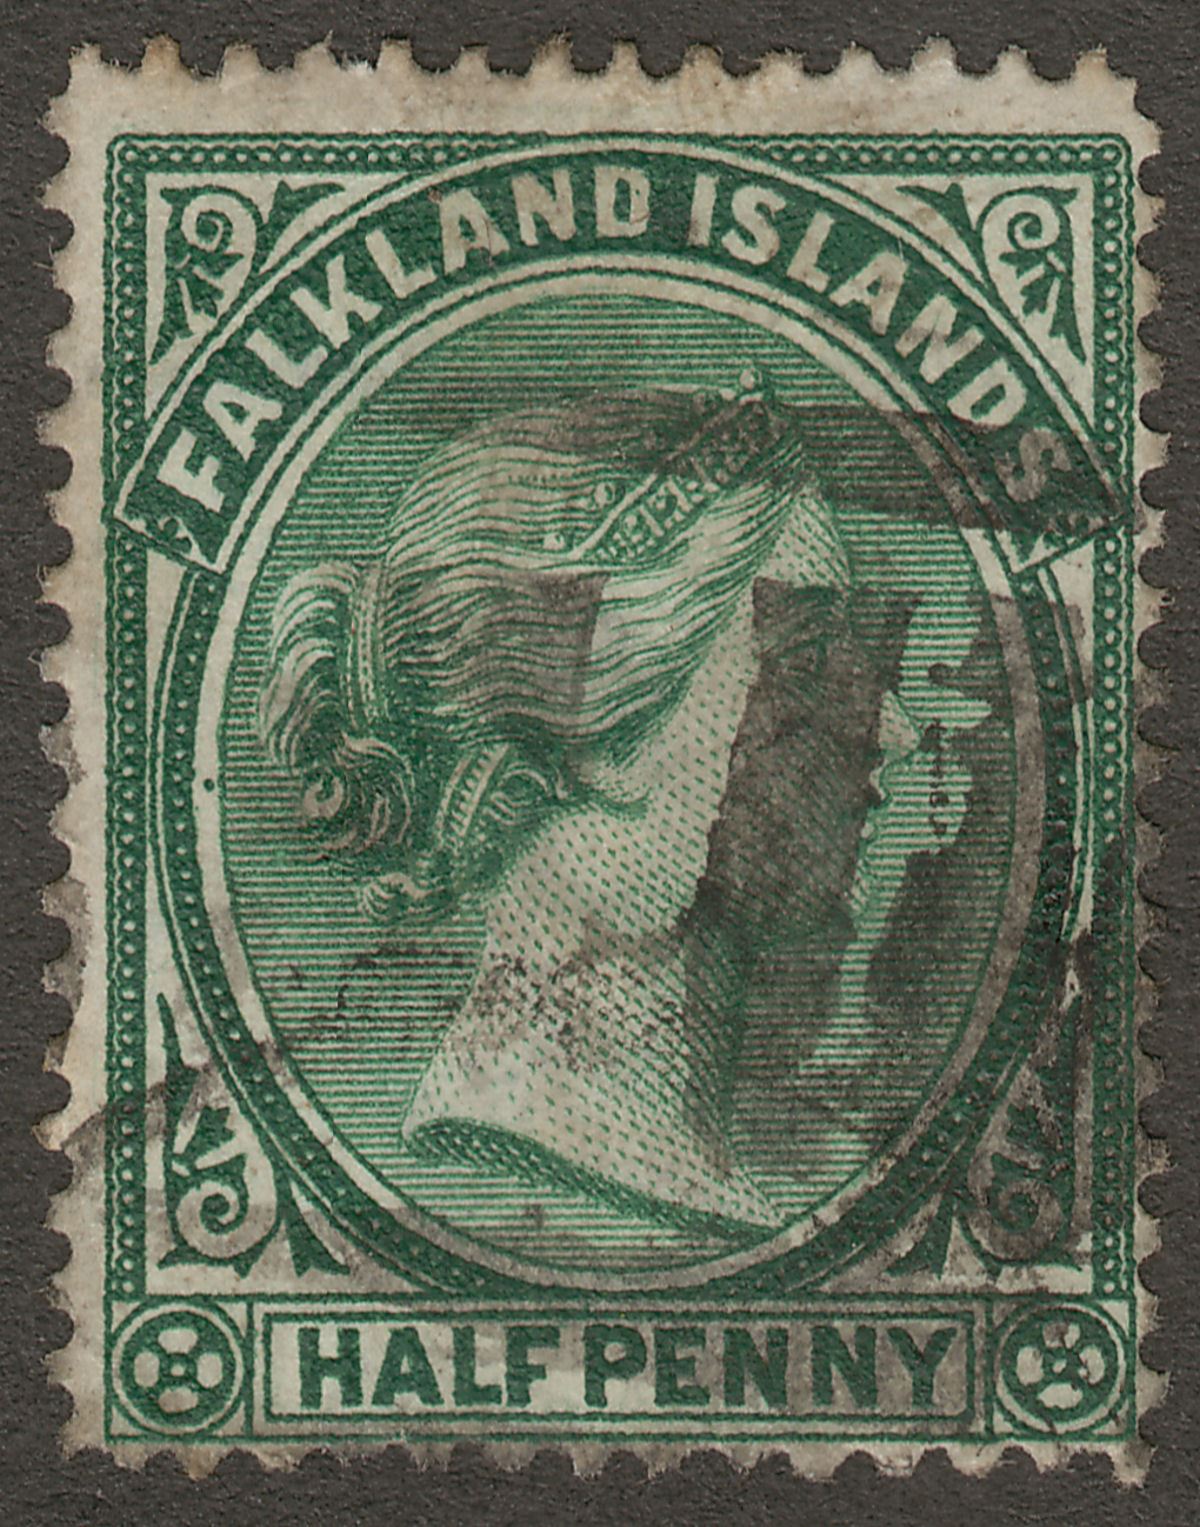 Falkland Islands 1892 QV ½d Green Used SG16 with Pointed Nose FI Cork Postmark